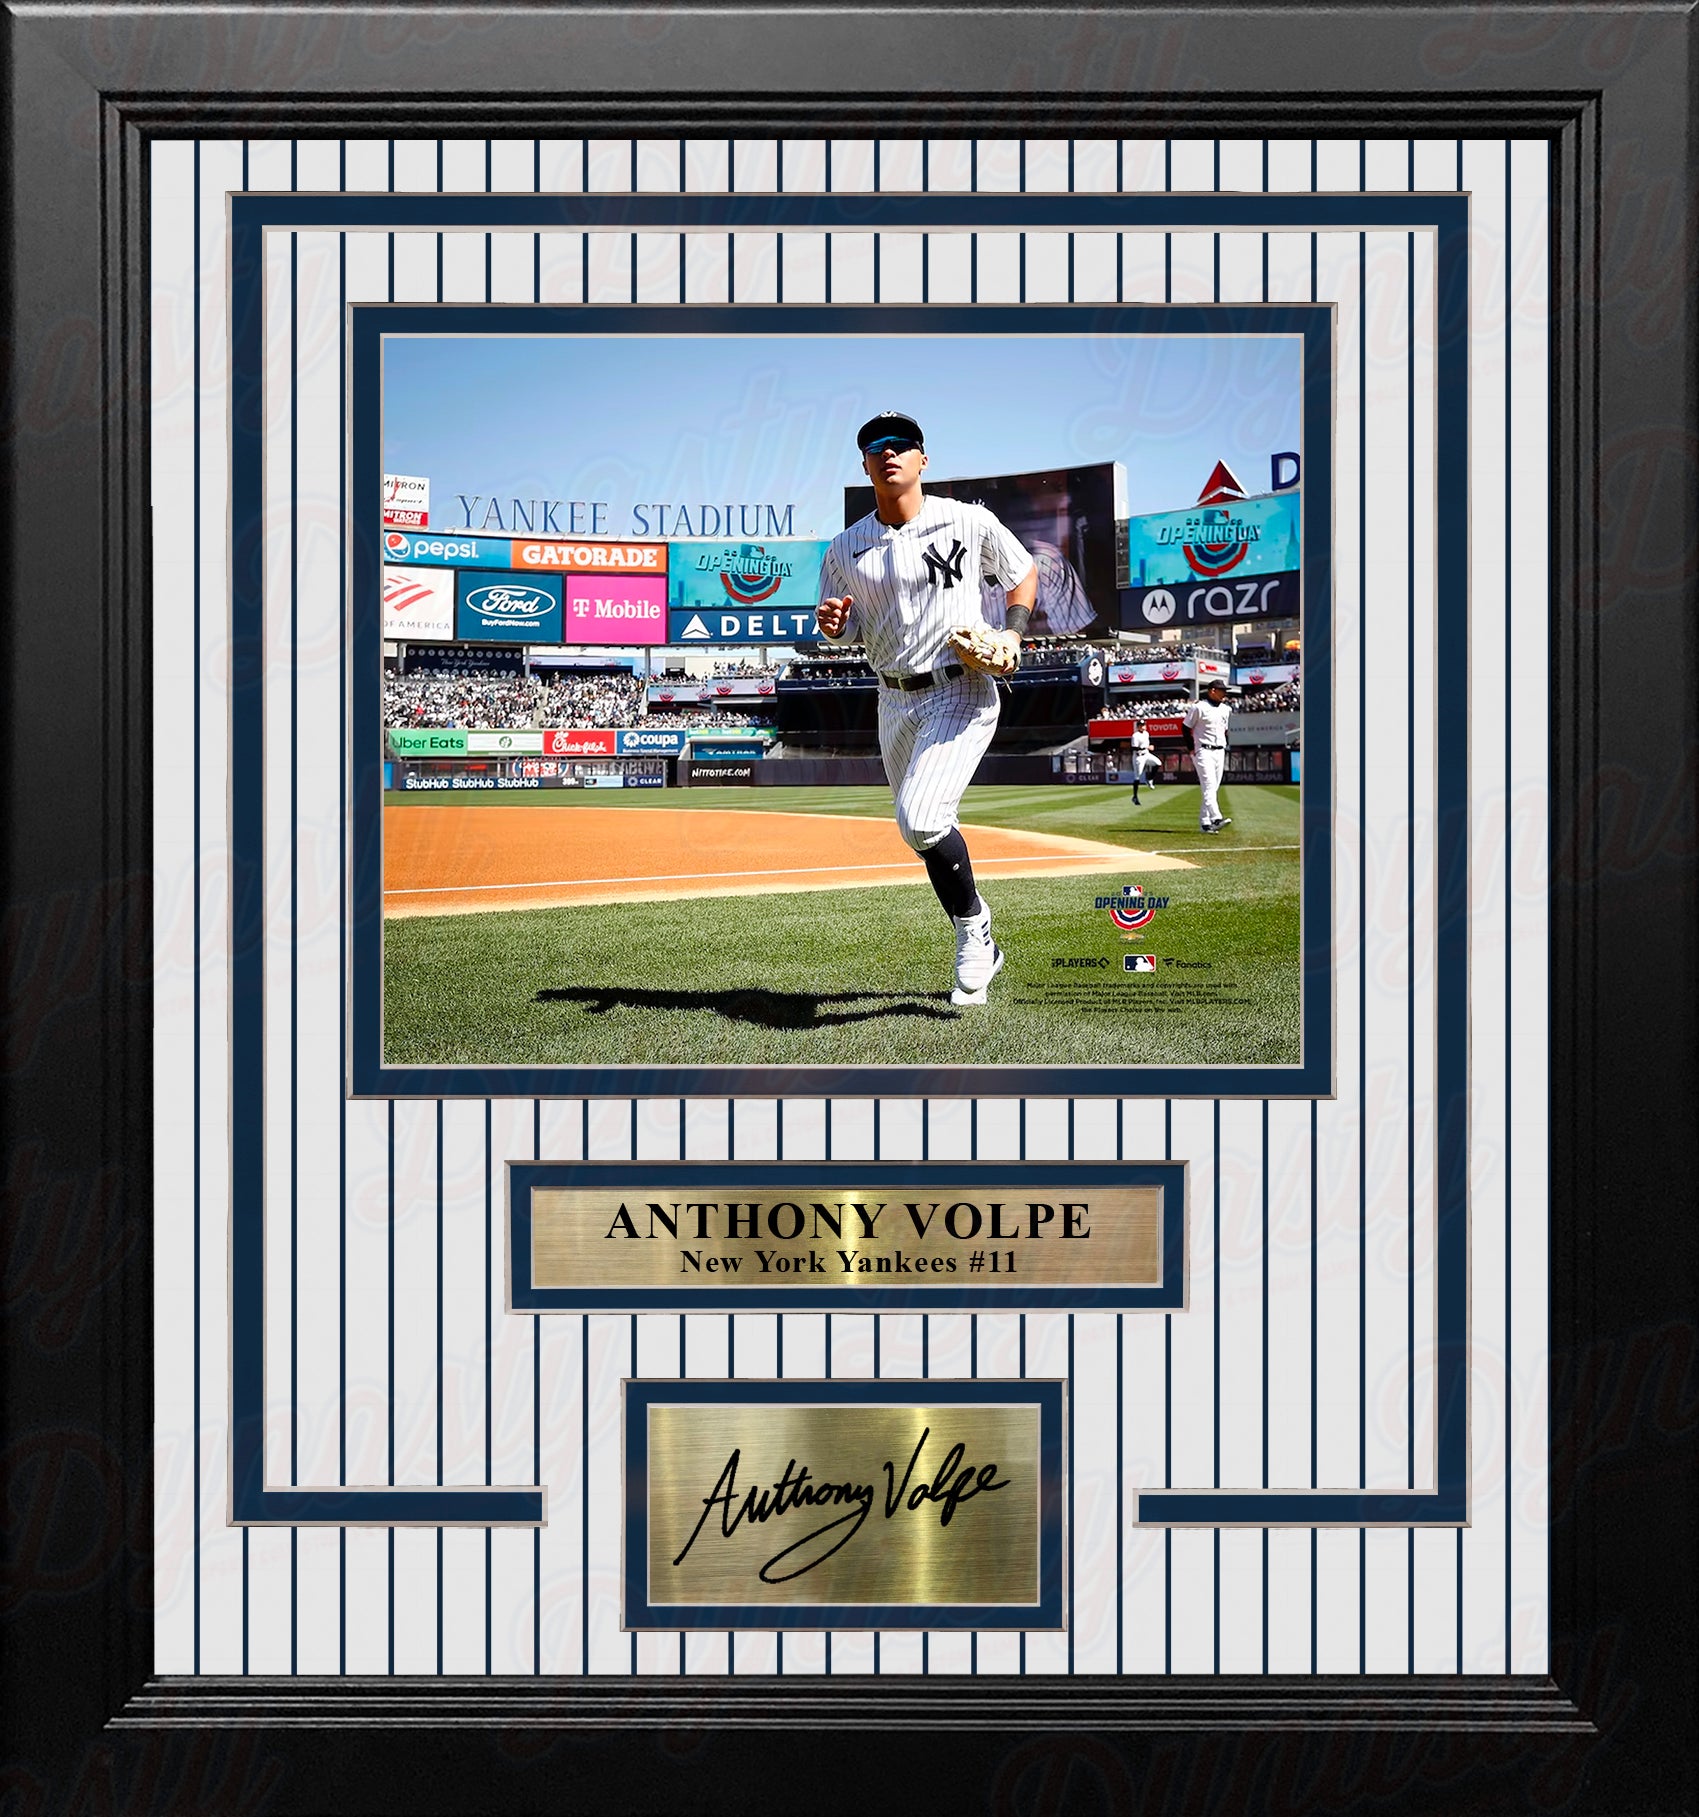 Anthony Volpe Walks Onto the Field New York Yankees 8" x 10" Framed Photo with Engraved Autograph - Dynasty Sports & Framing 